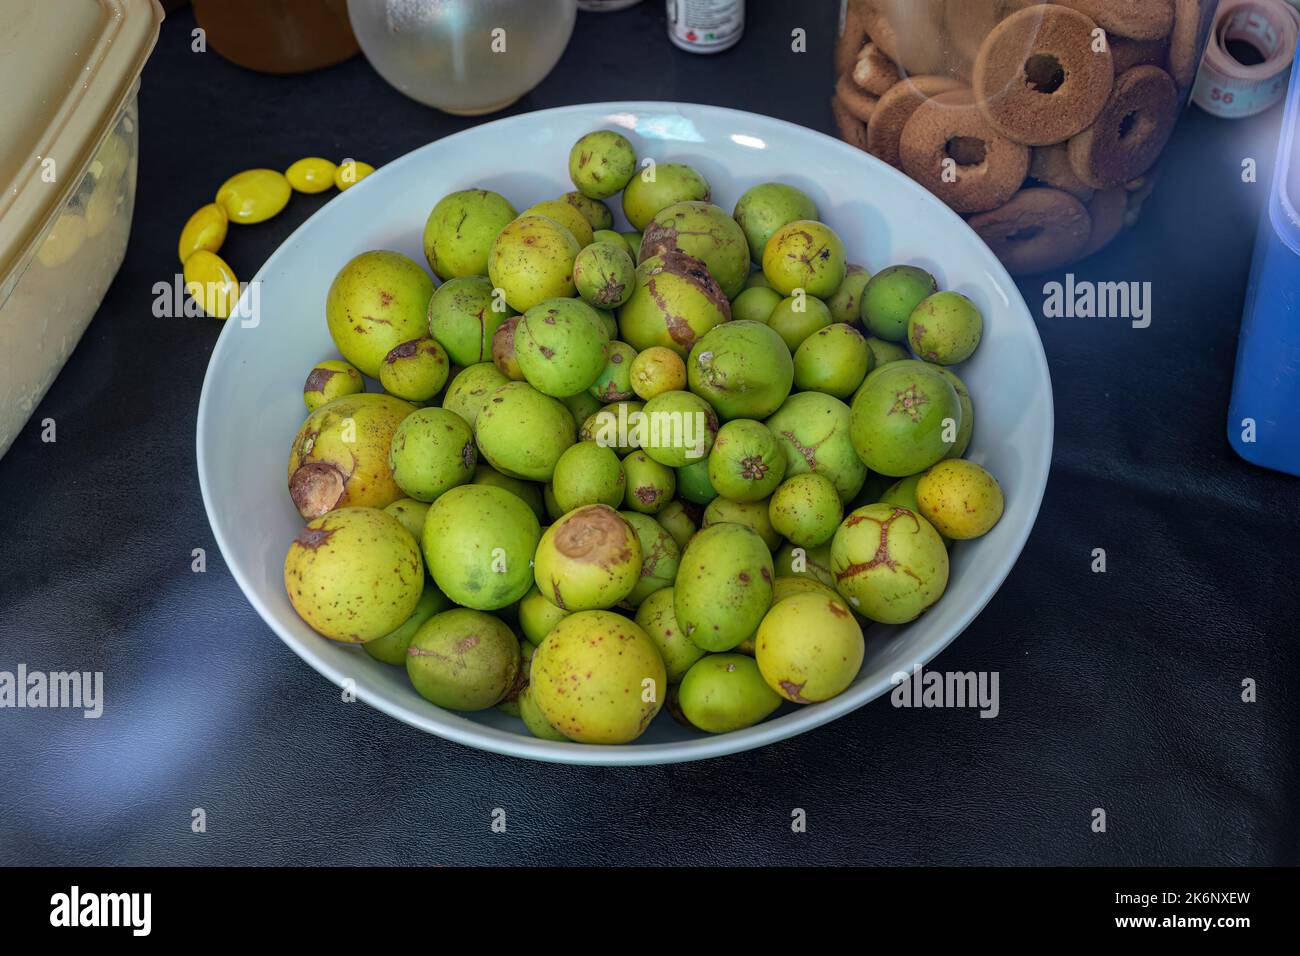 South American fruits known as mangabas of the tree Hancornia speciosa commonly called mangabeira on a white plate Stock Photo